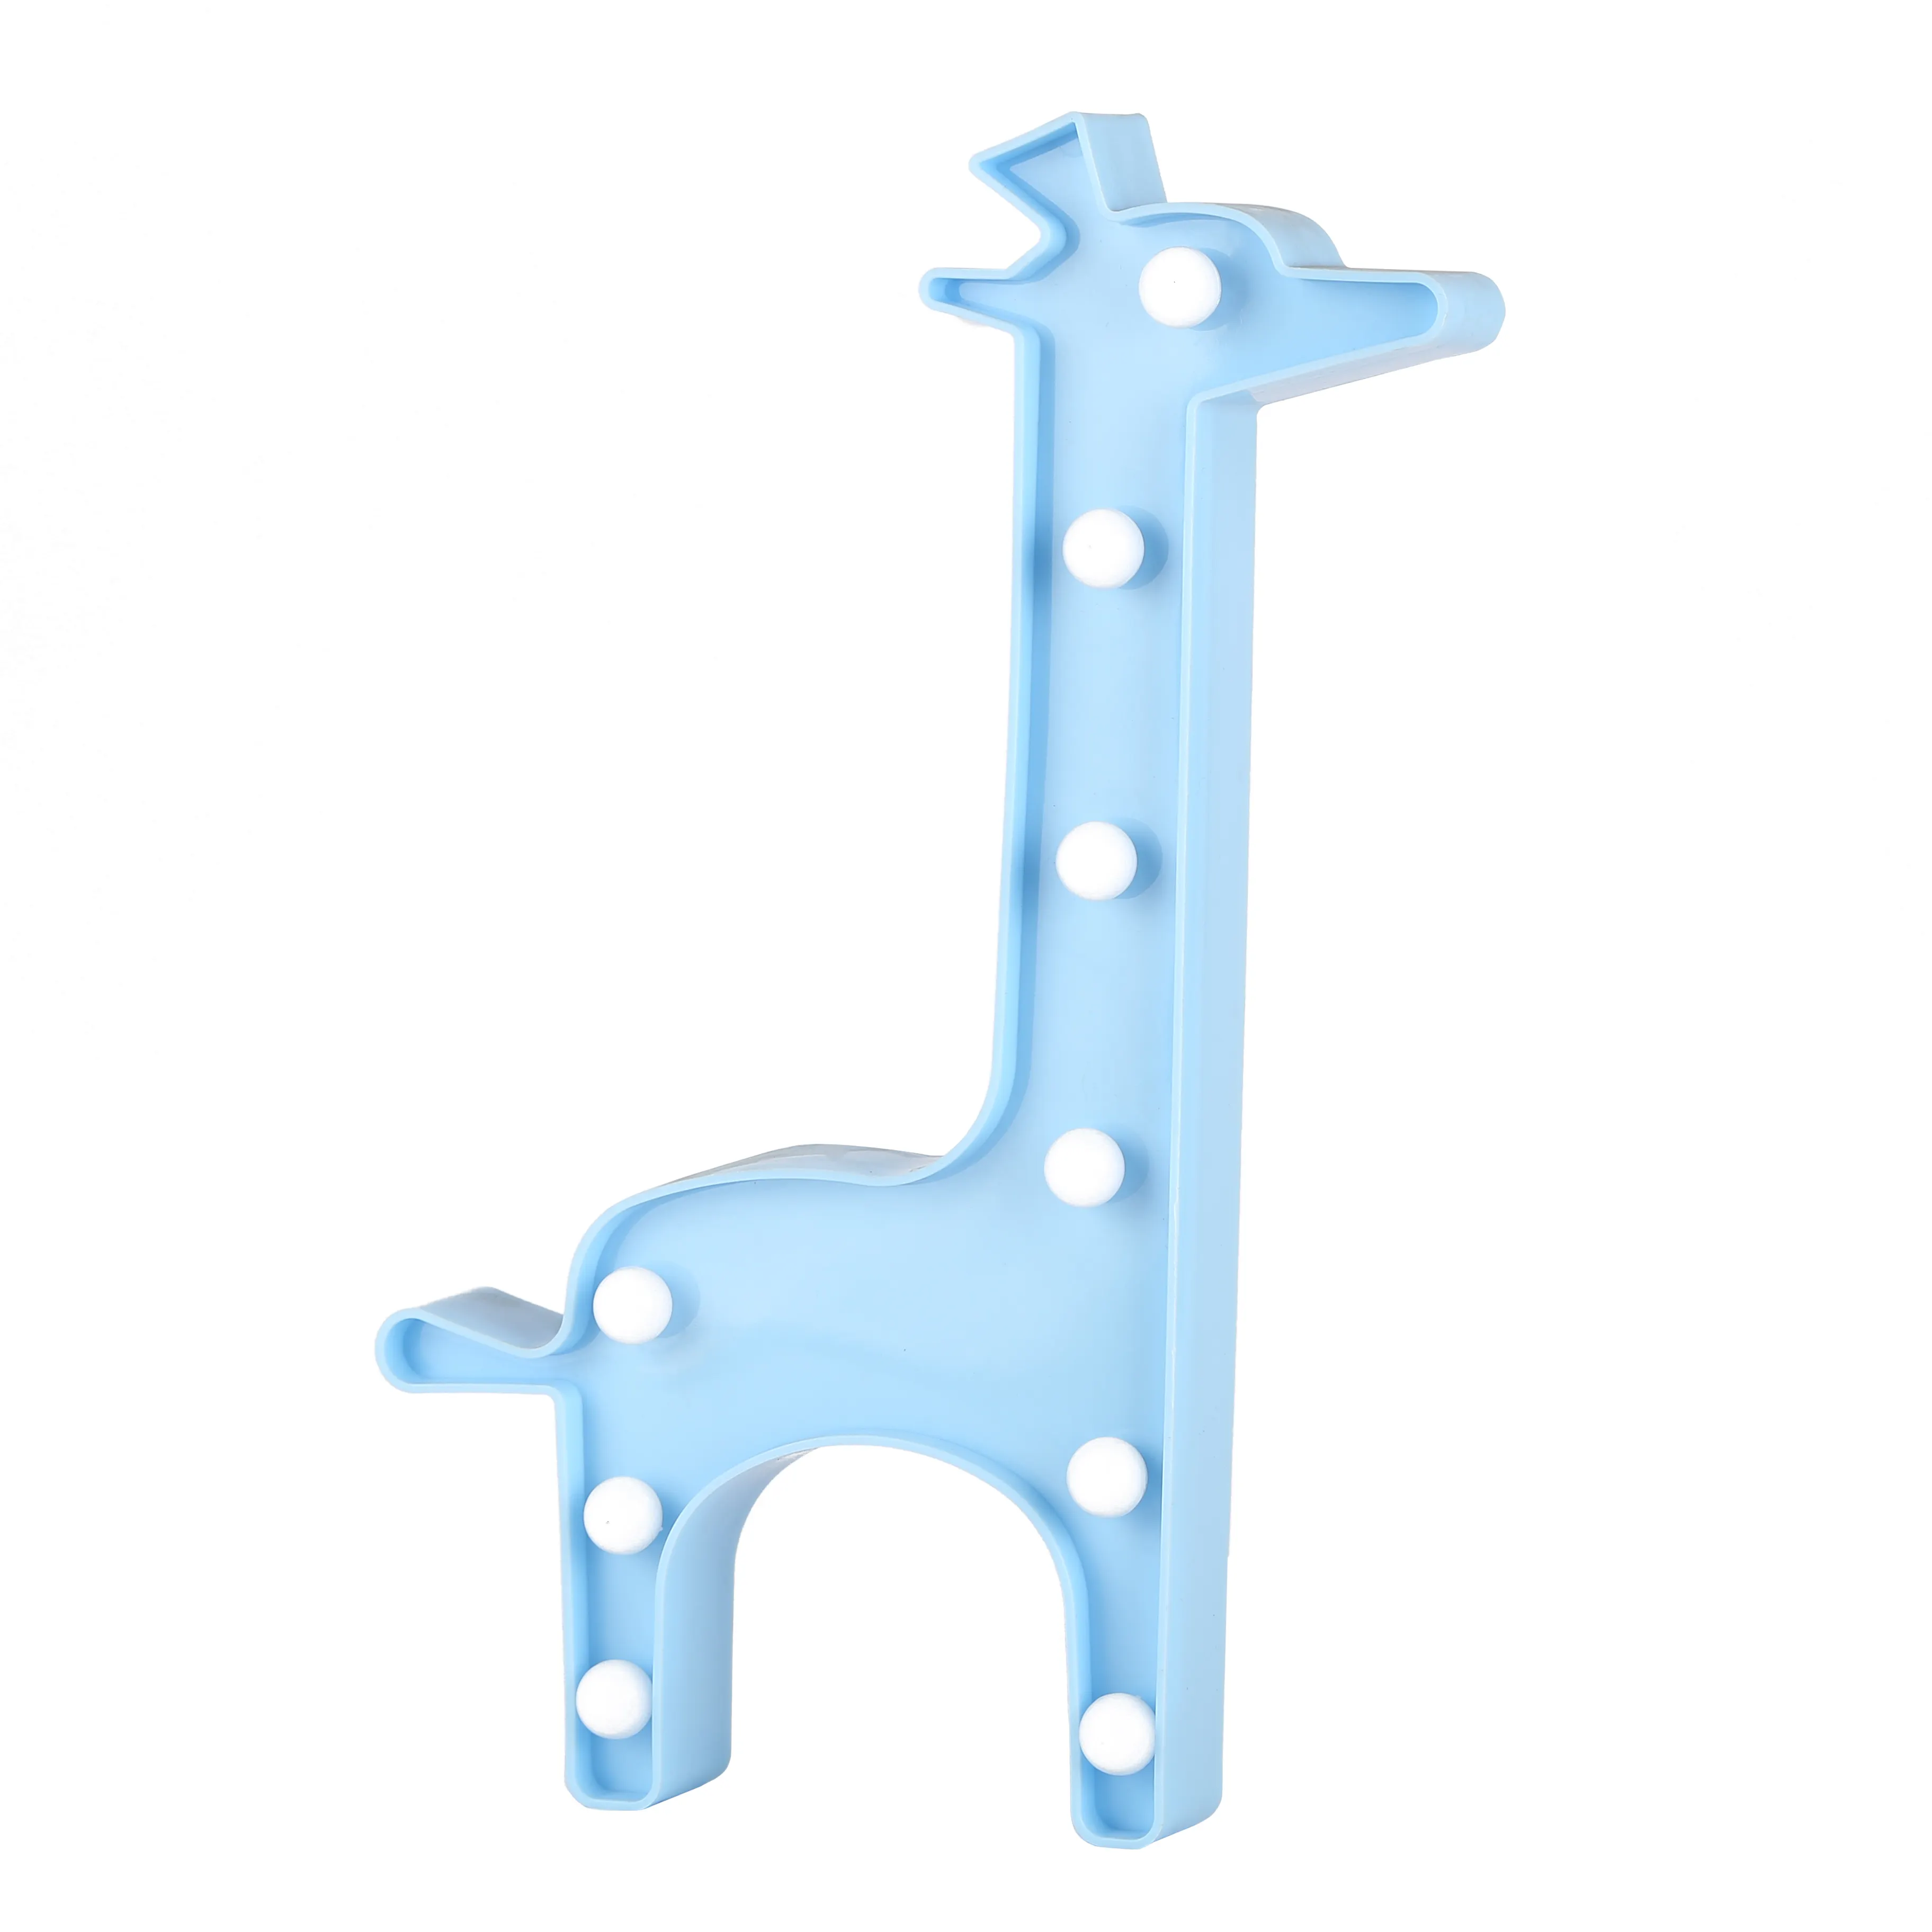 3D giraffe fawn Marquee Neon Light Hanging Wall Led Sign Lamp Party Lights Baby Room Decor Night Light